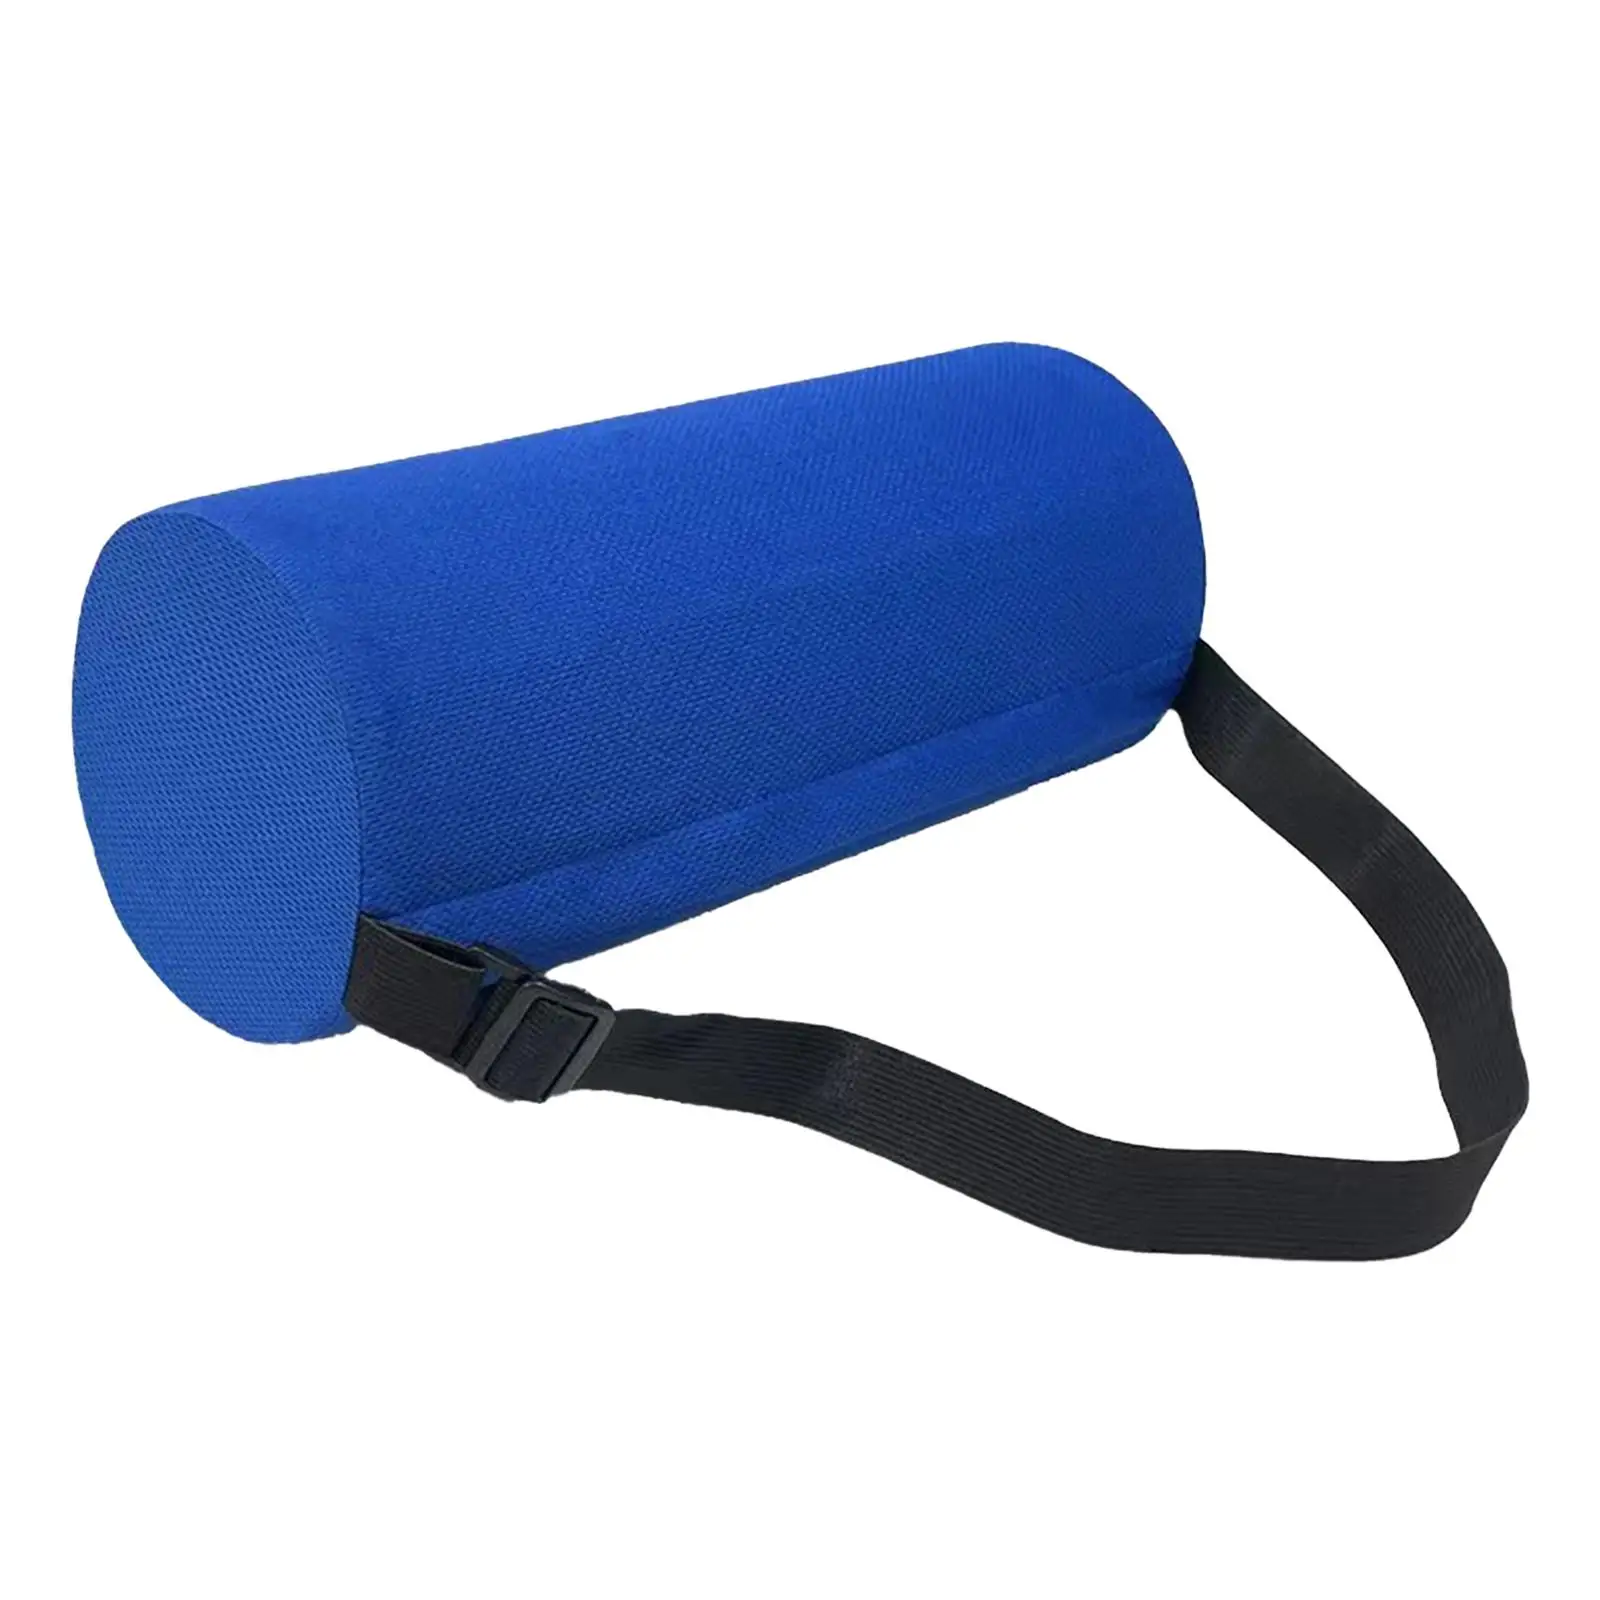 Cylindrical Waist Pillow Memory Foam Nonslip Washable Breathable Comfortable Waist Support Pillow for Home Dorm Vehicle